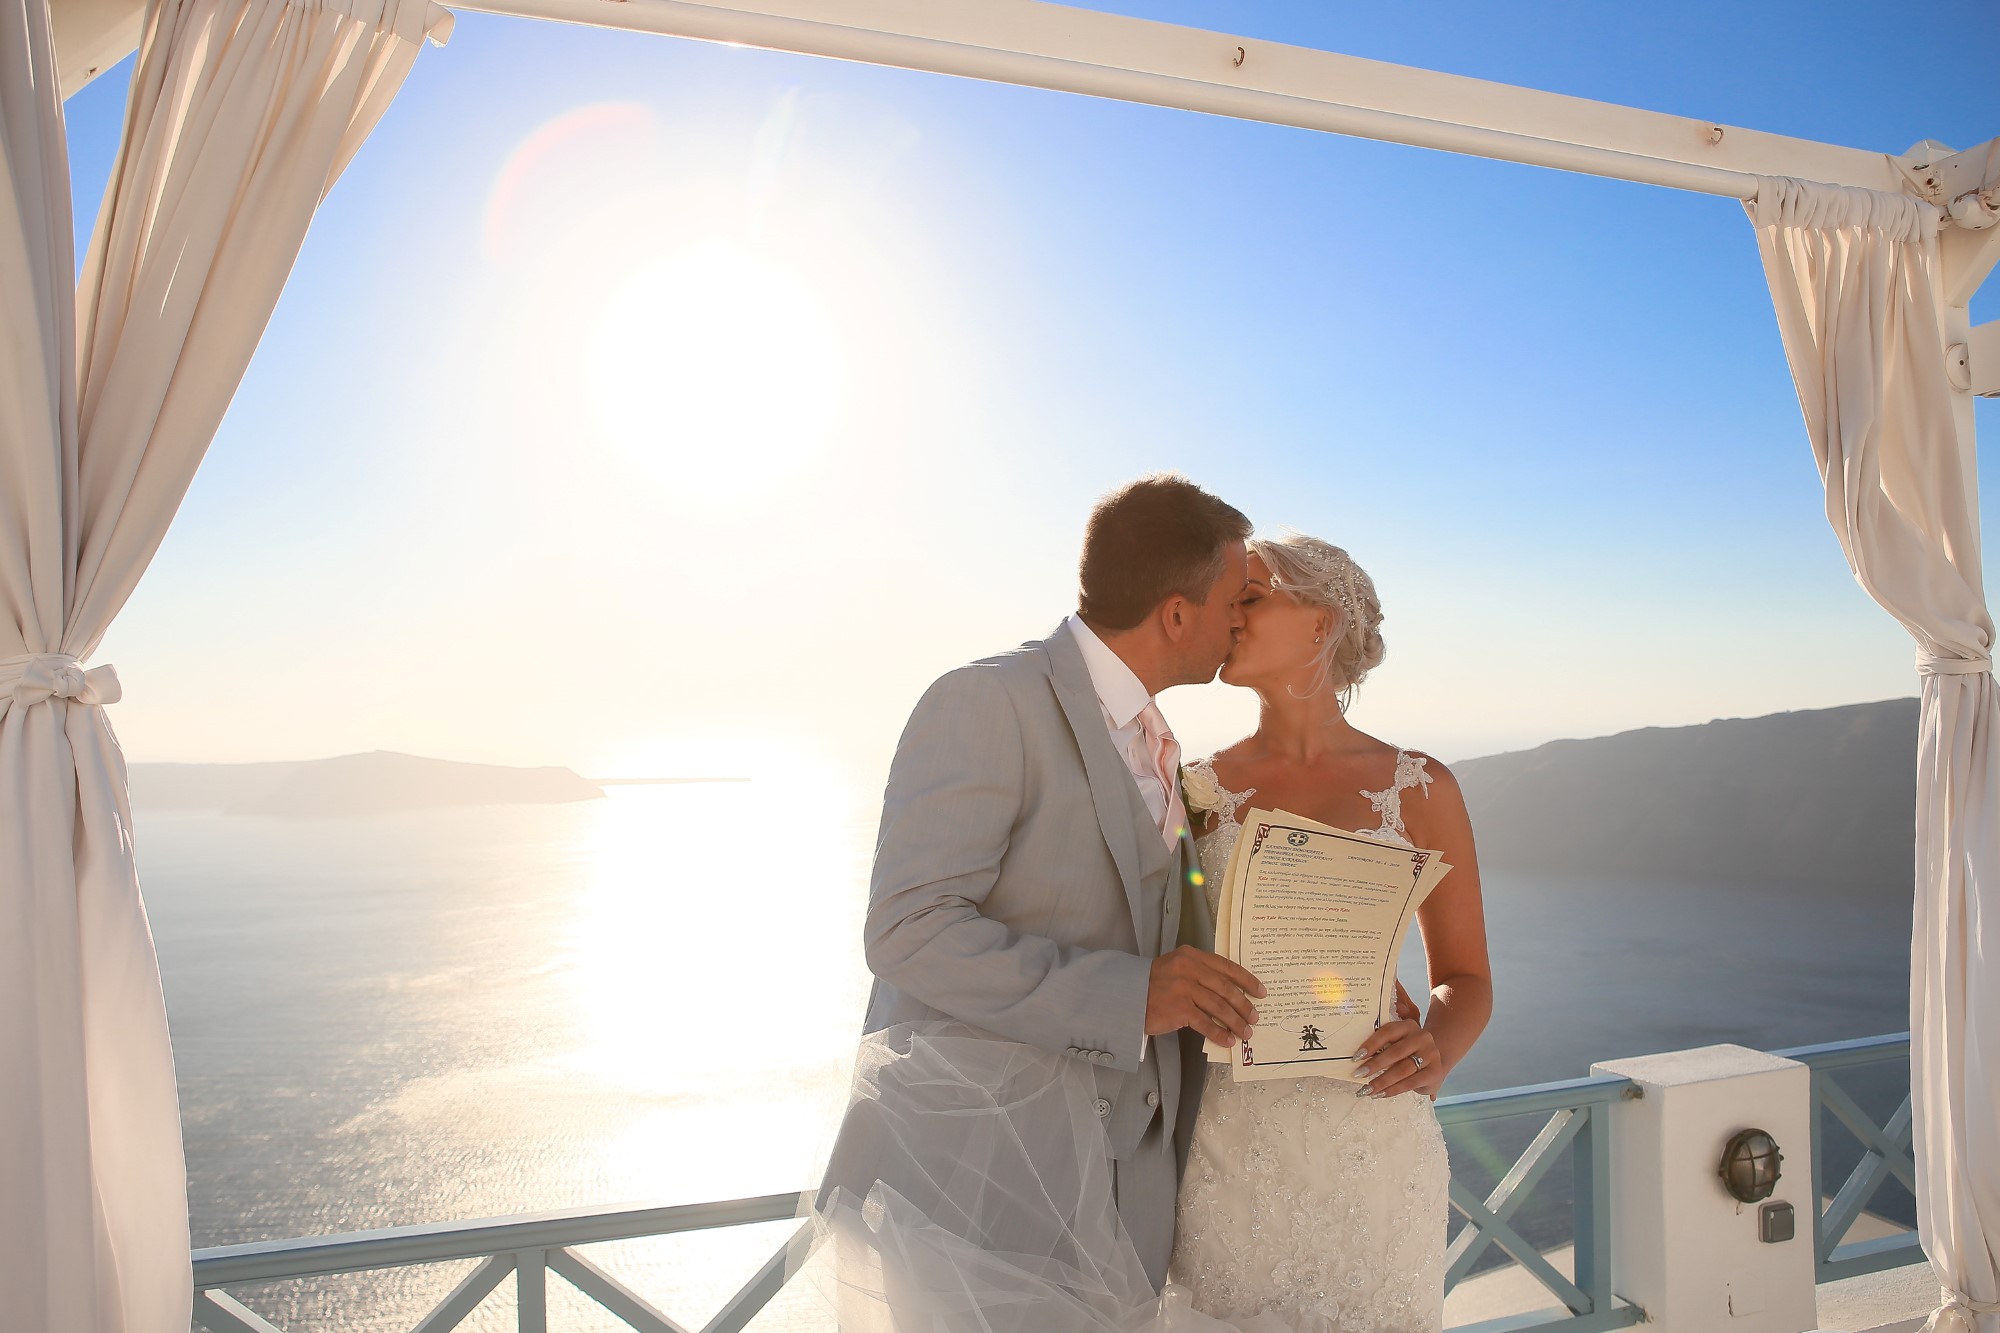 Making Your Destination Wedding Legal Without the Hassle pic